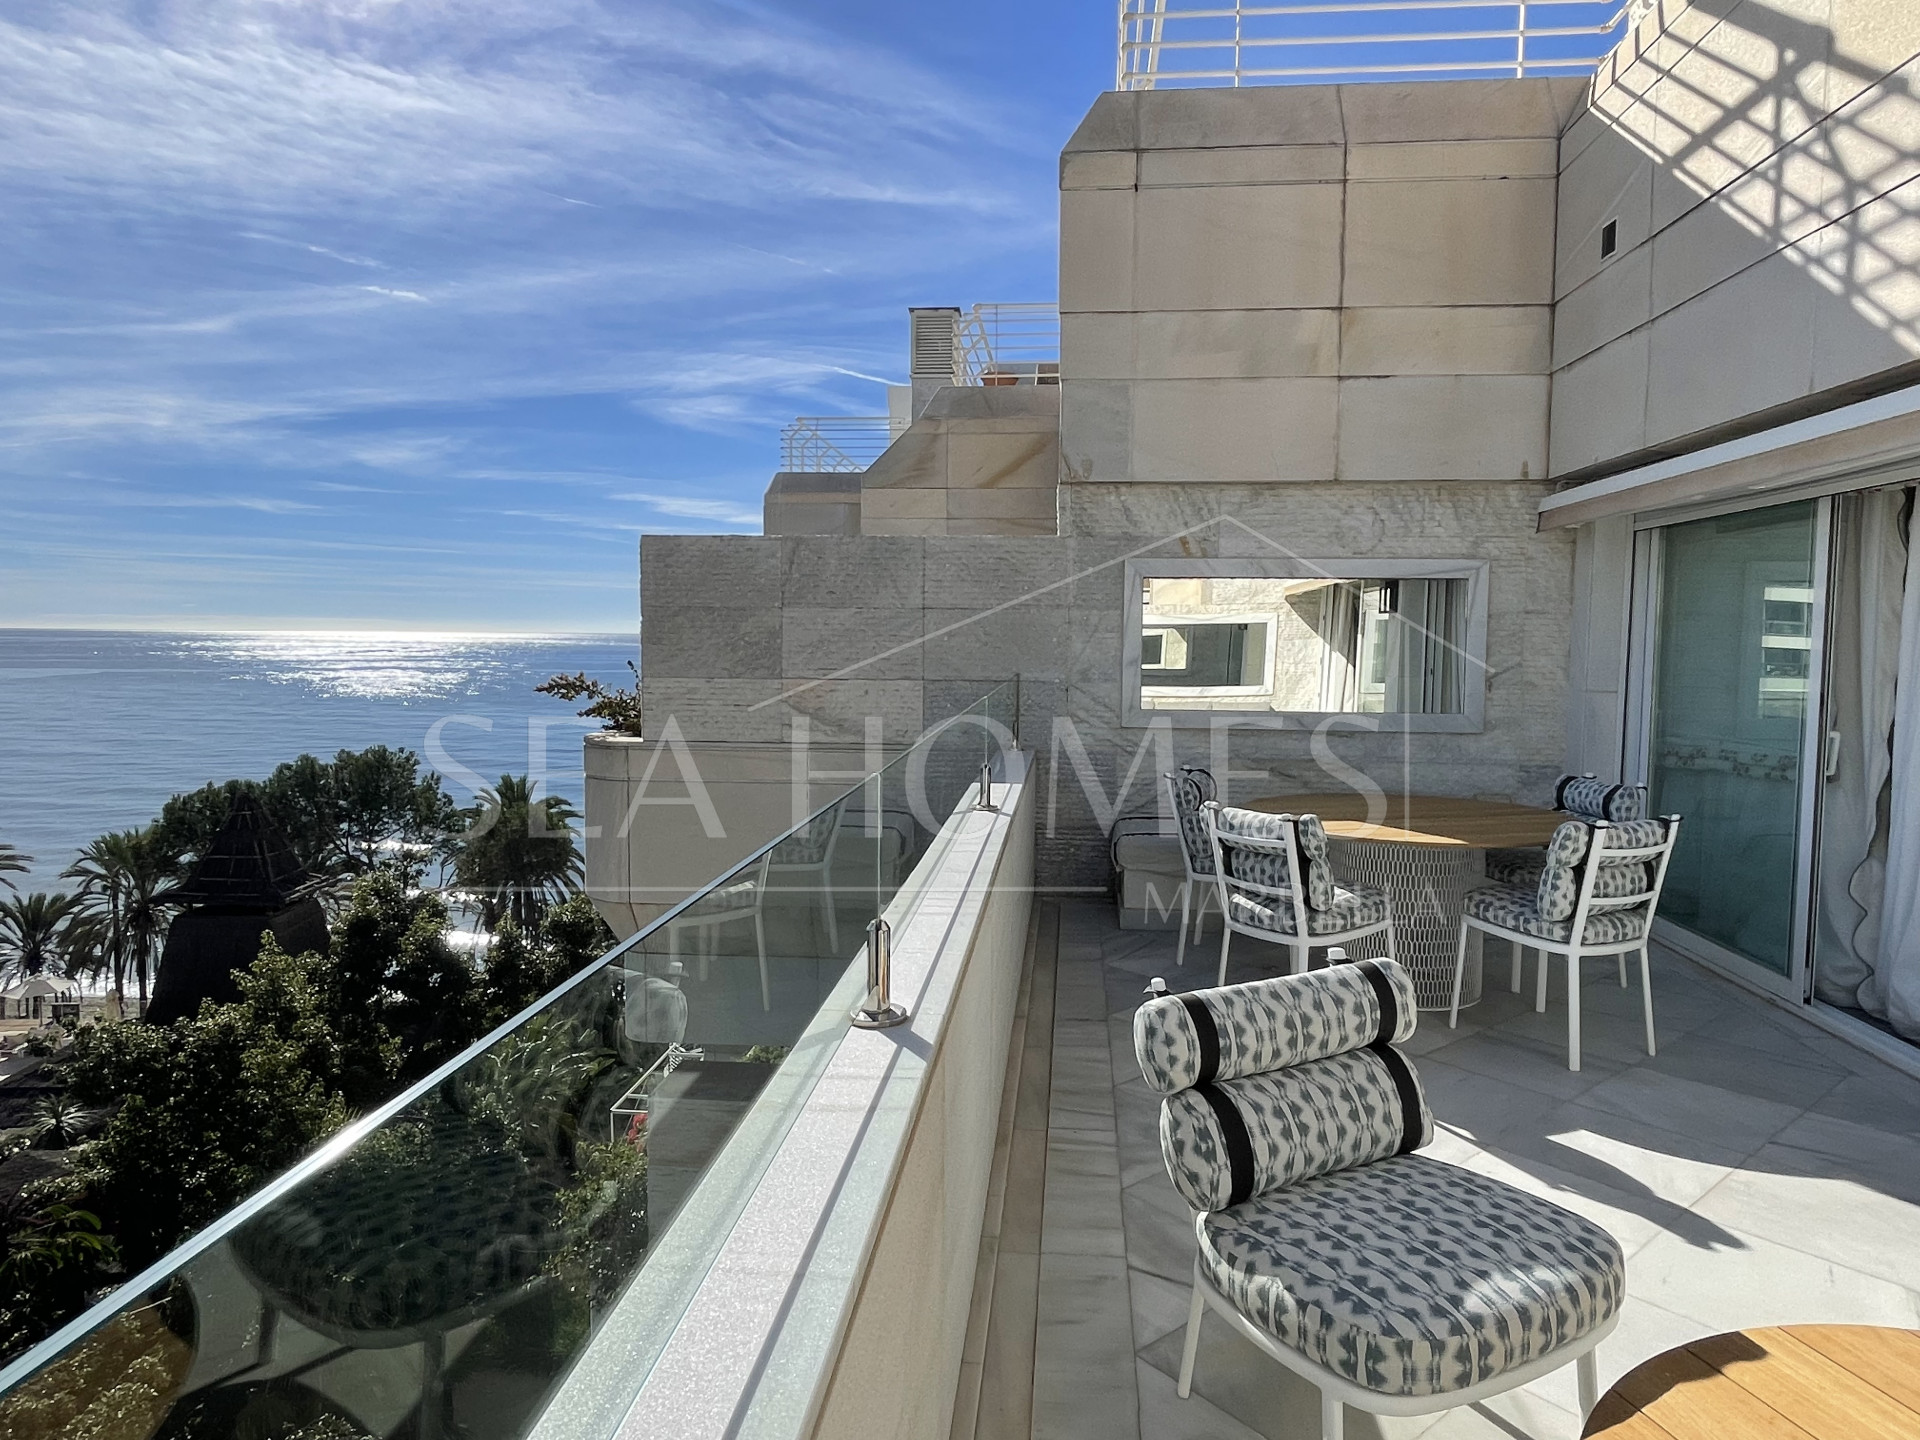 Amazing Duplex Penthouse in Marina Mariola, one of the most sought-after buildings of the Golden Mile.